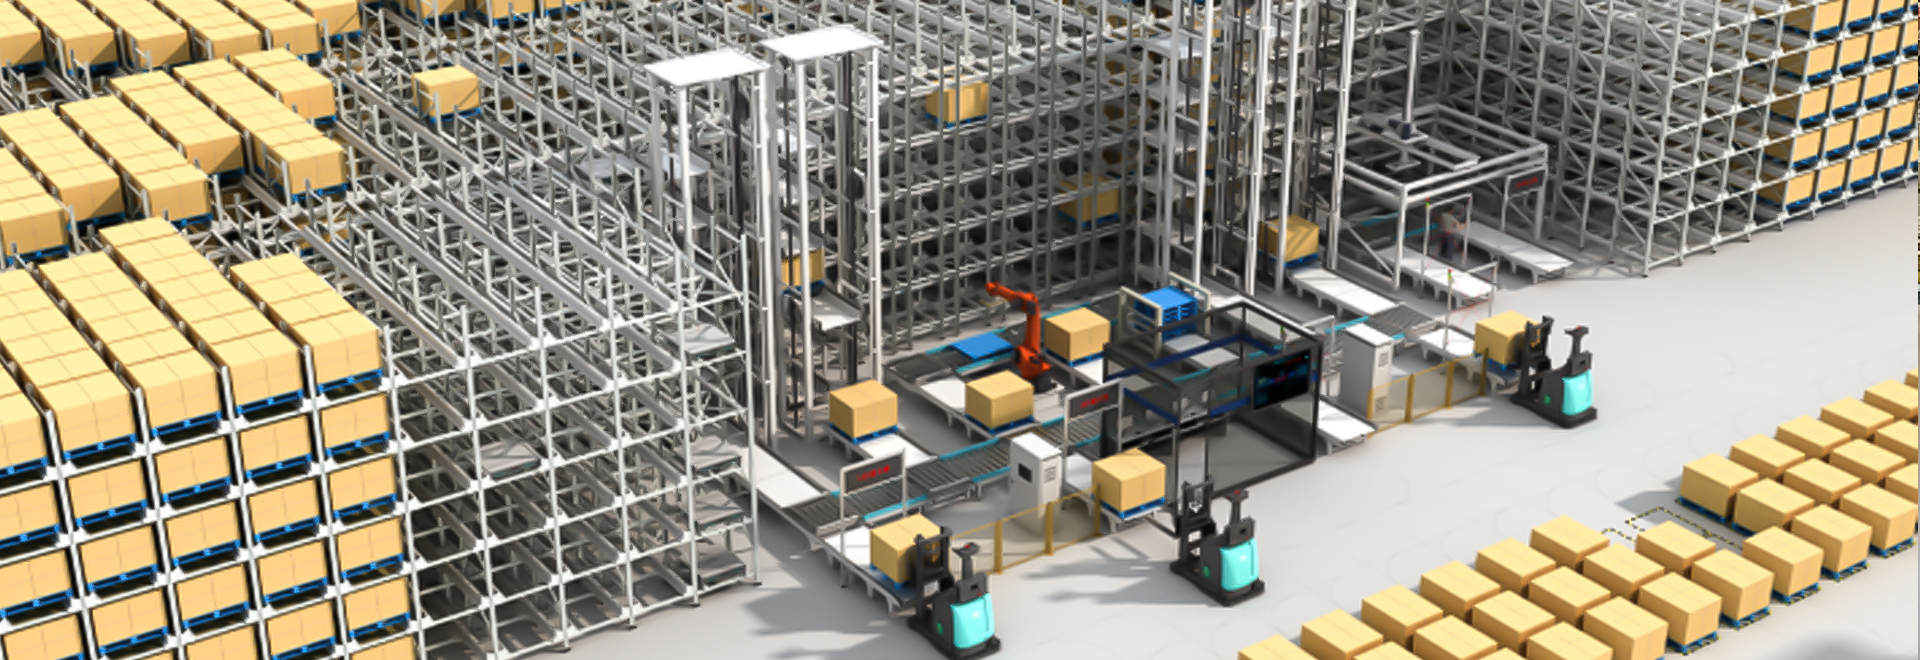 Smart Solutions in Supply Chain: Multiway Robotics' Unmanned Forklifts Elevate Warehouse Efficiency